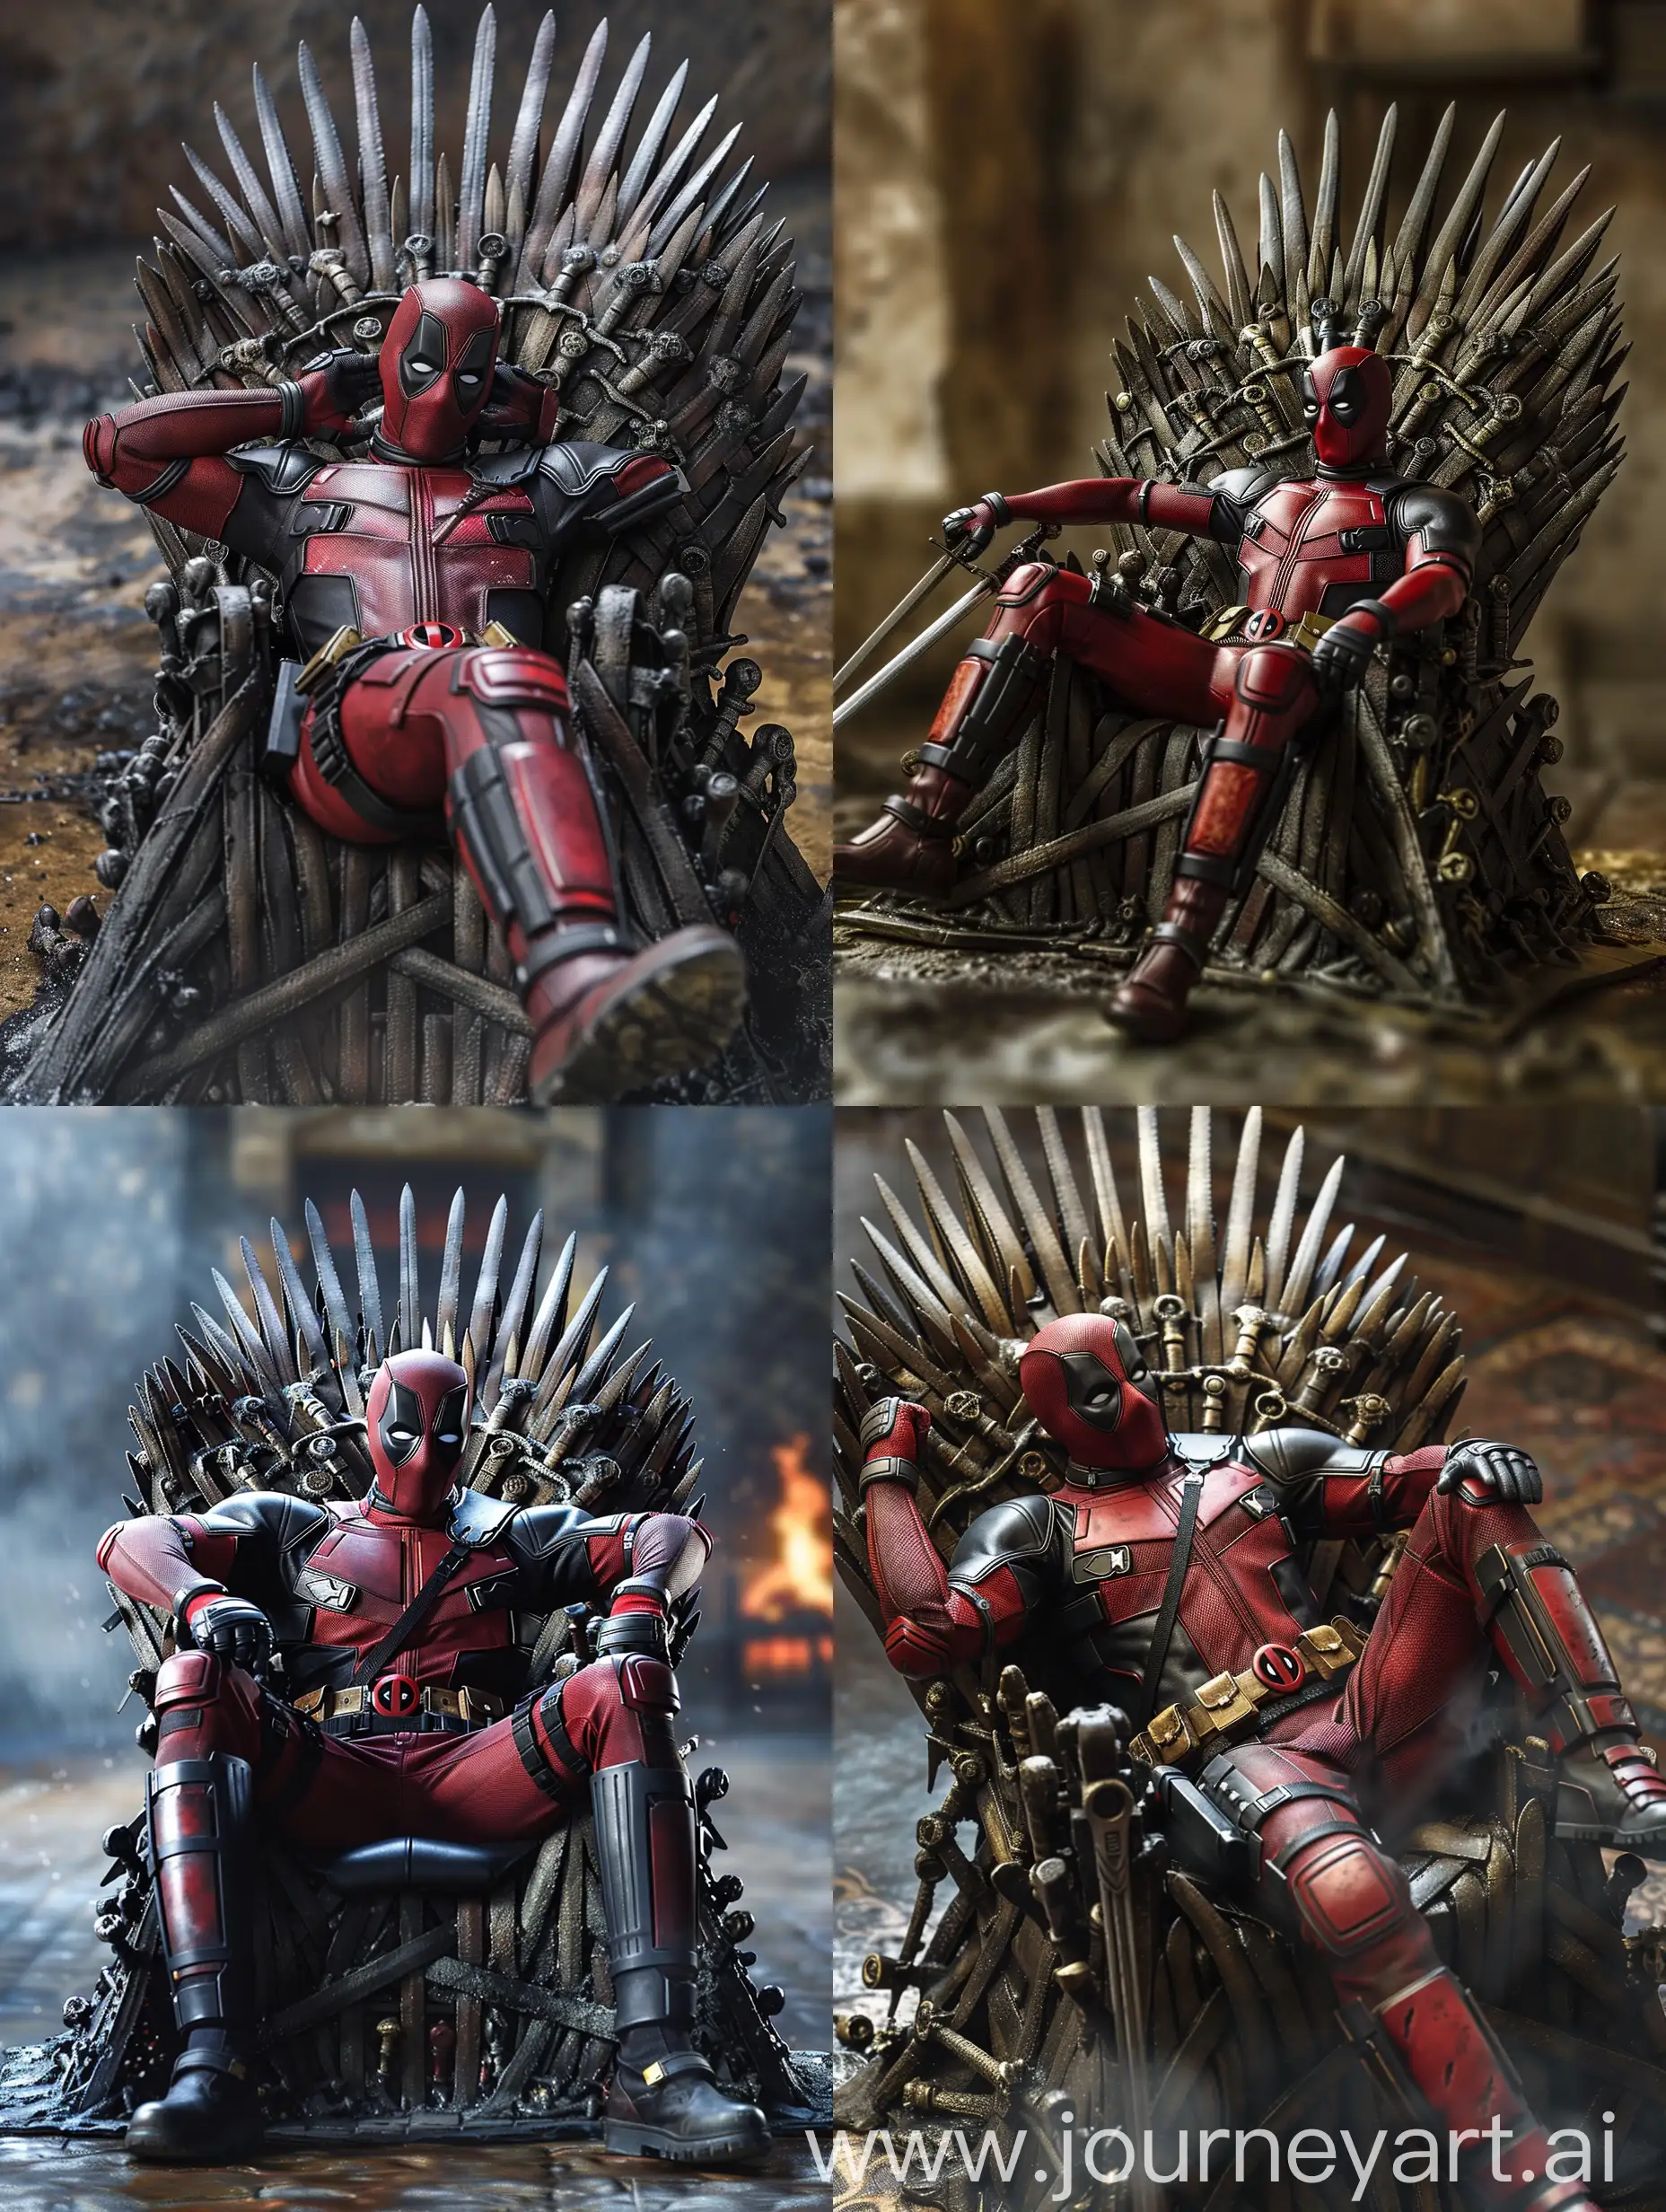 Deadpool lazy lies on a Iron Throne from Game of Thrones